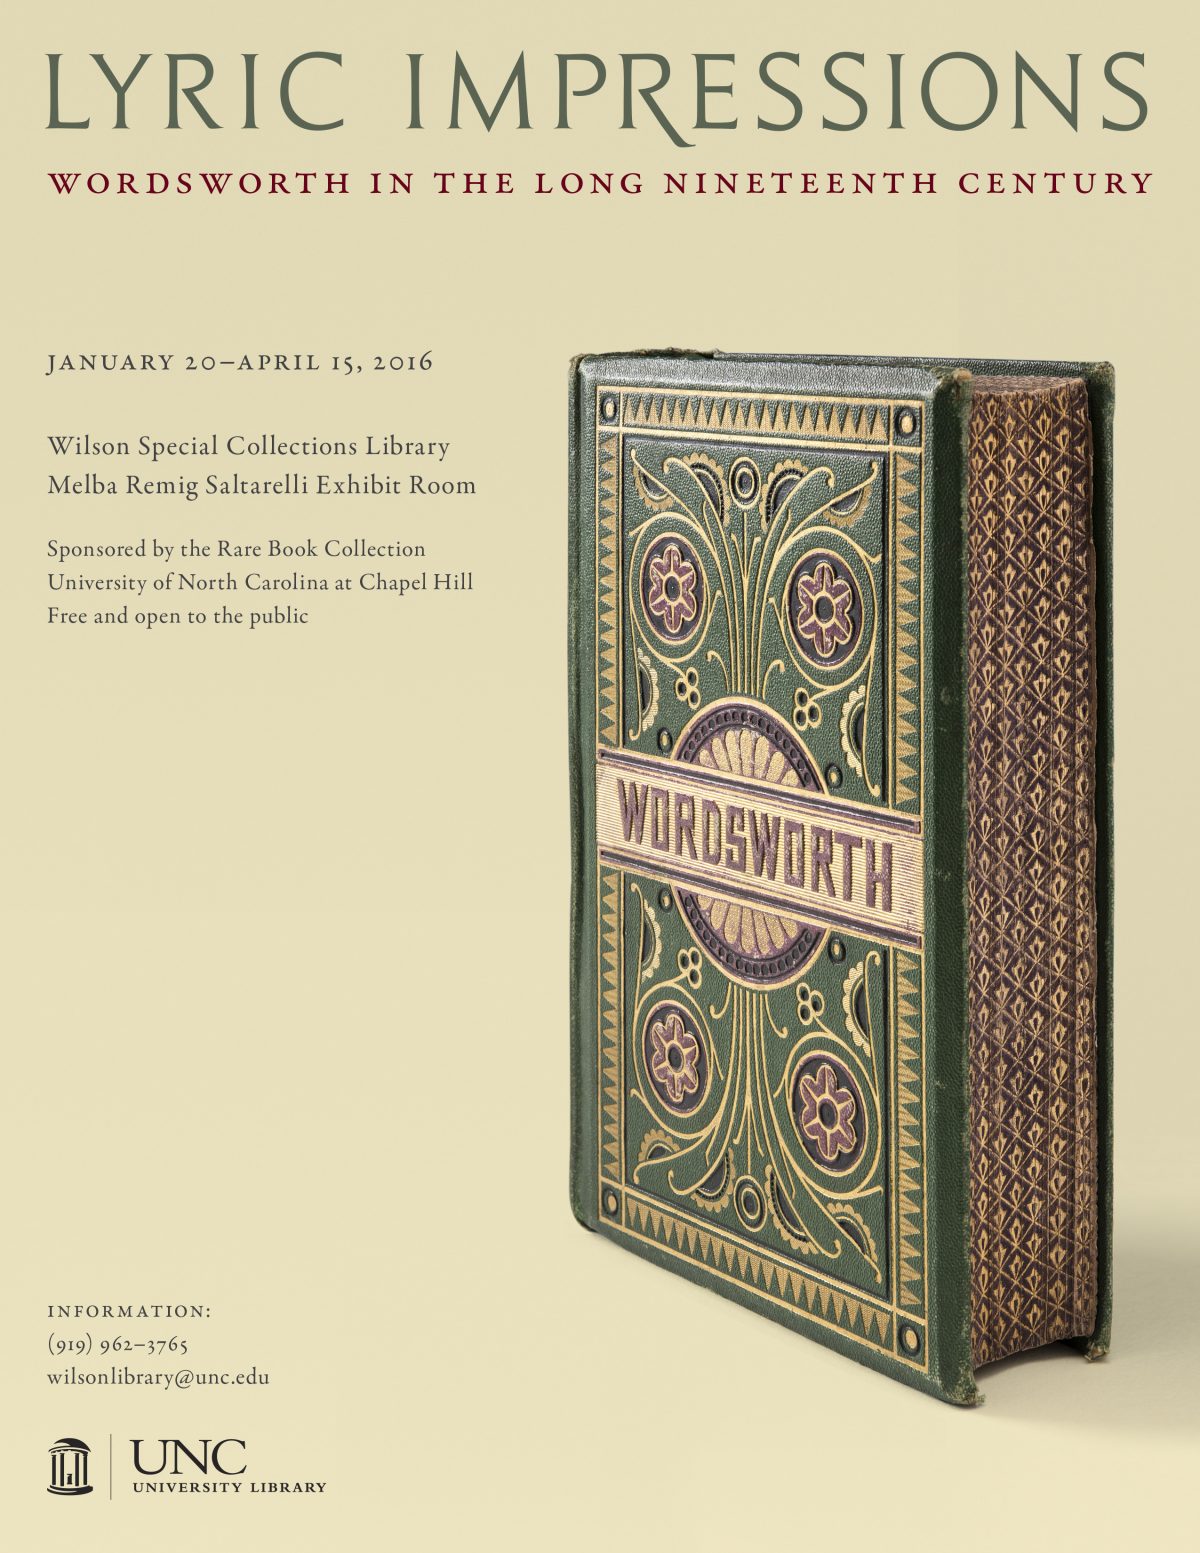 Assessment of UNC Rare Book Collection’s “Lyric Impressions: Wordsworth in the Long Nineteenth Century” Exhibition